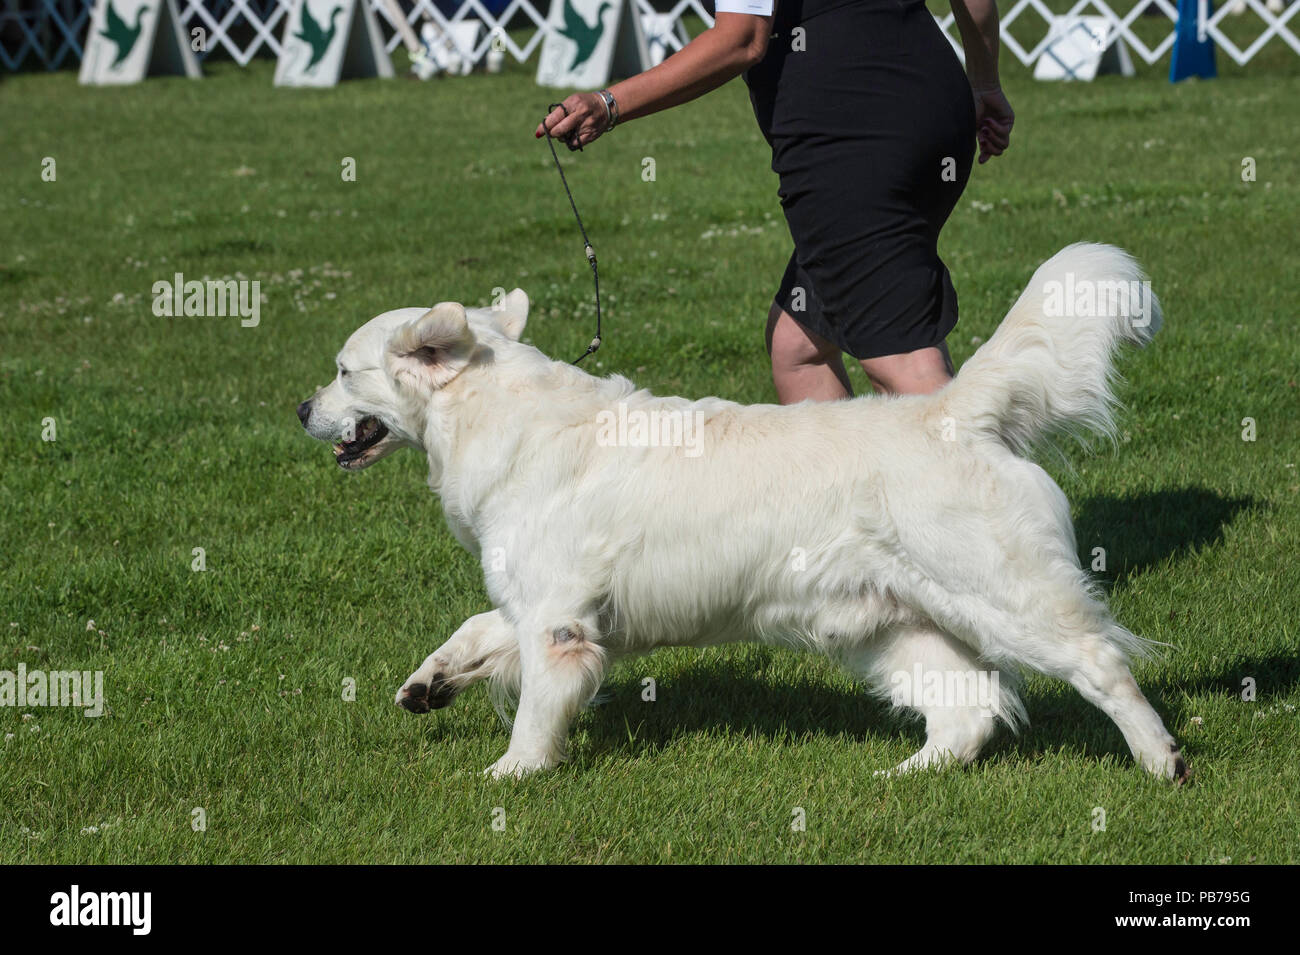 Golden retriever dog, Evelyn Kenny Kennel and Obedience Club Dog show, Alberta, Canada Stock Photo